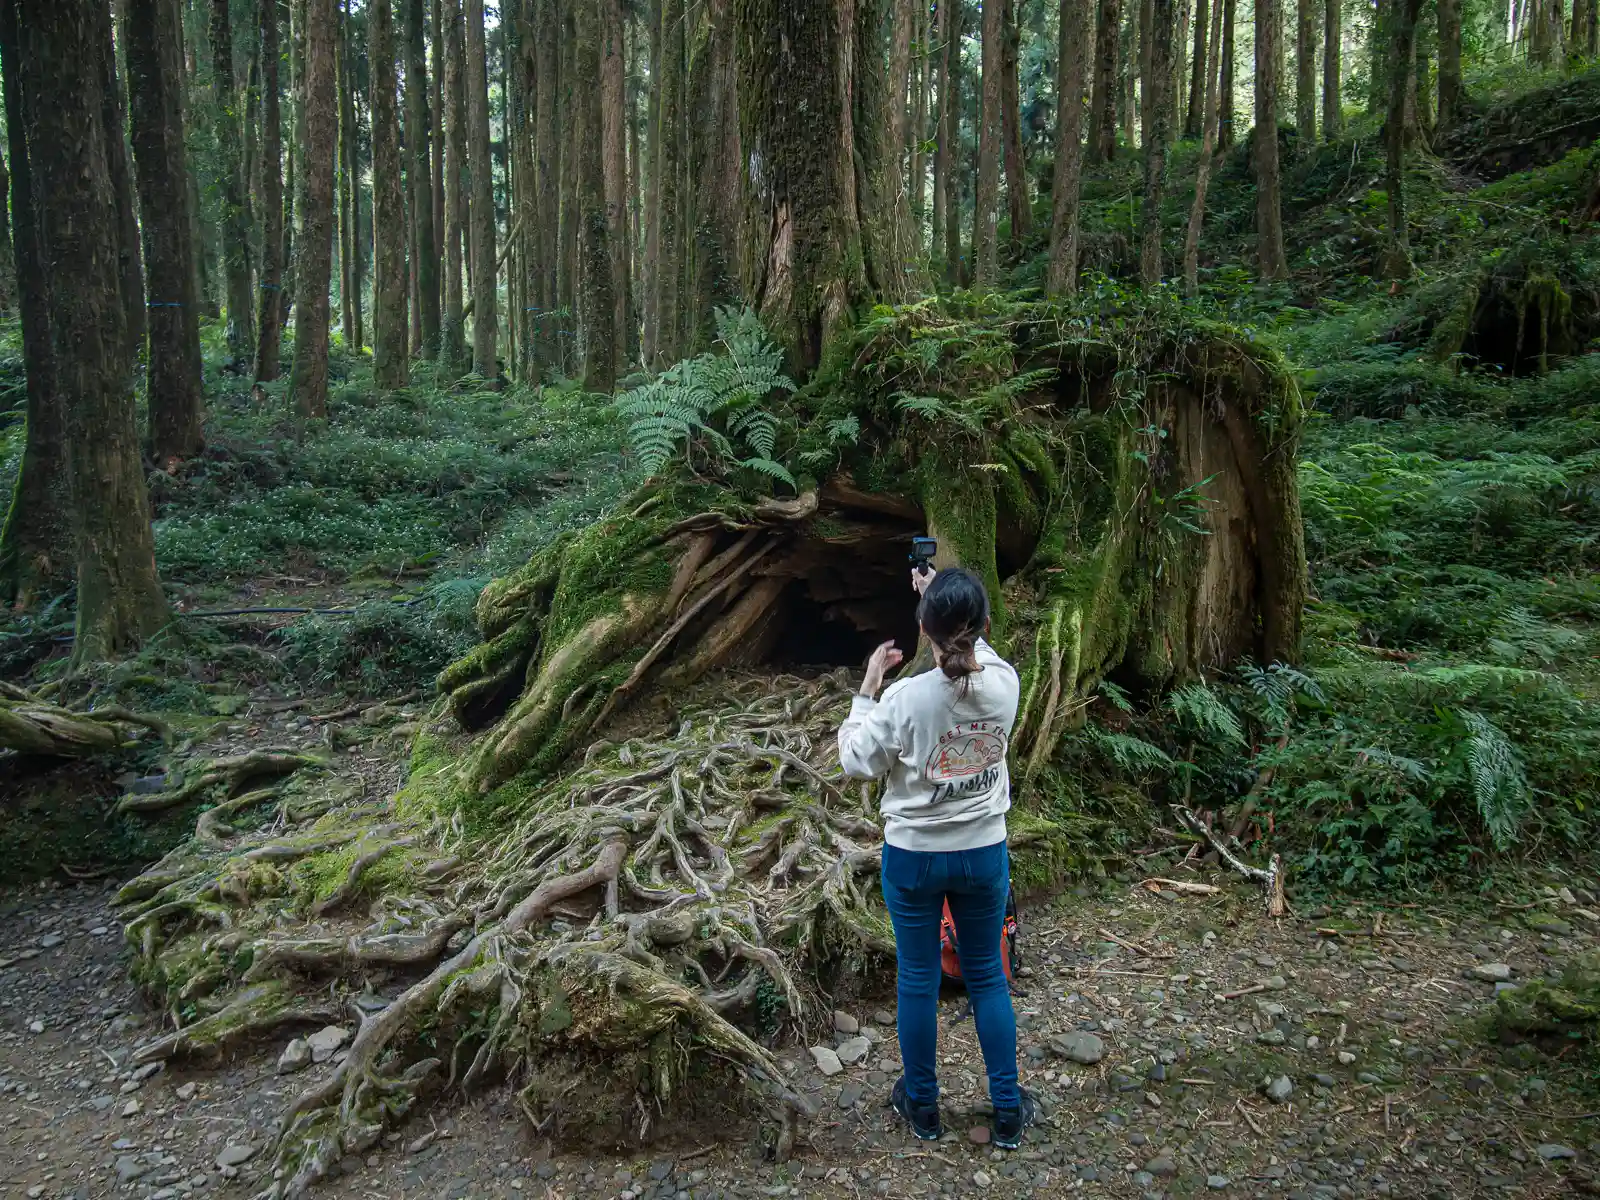 A tourist take a photo of a massive clump of exposed tree roots under an ancient tree.